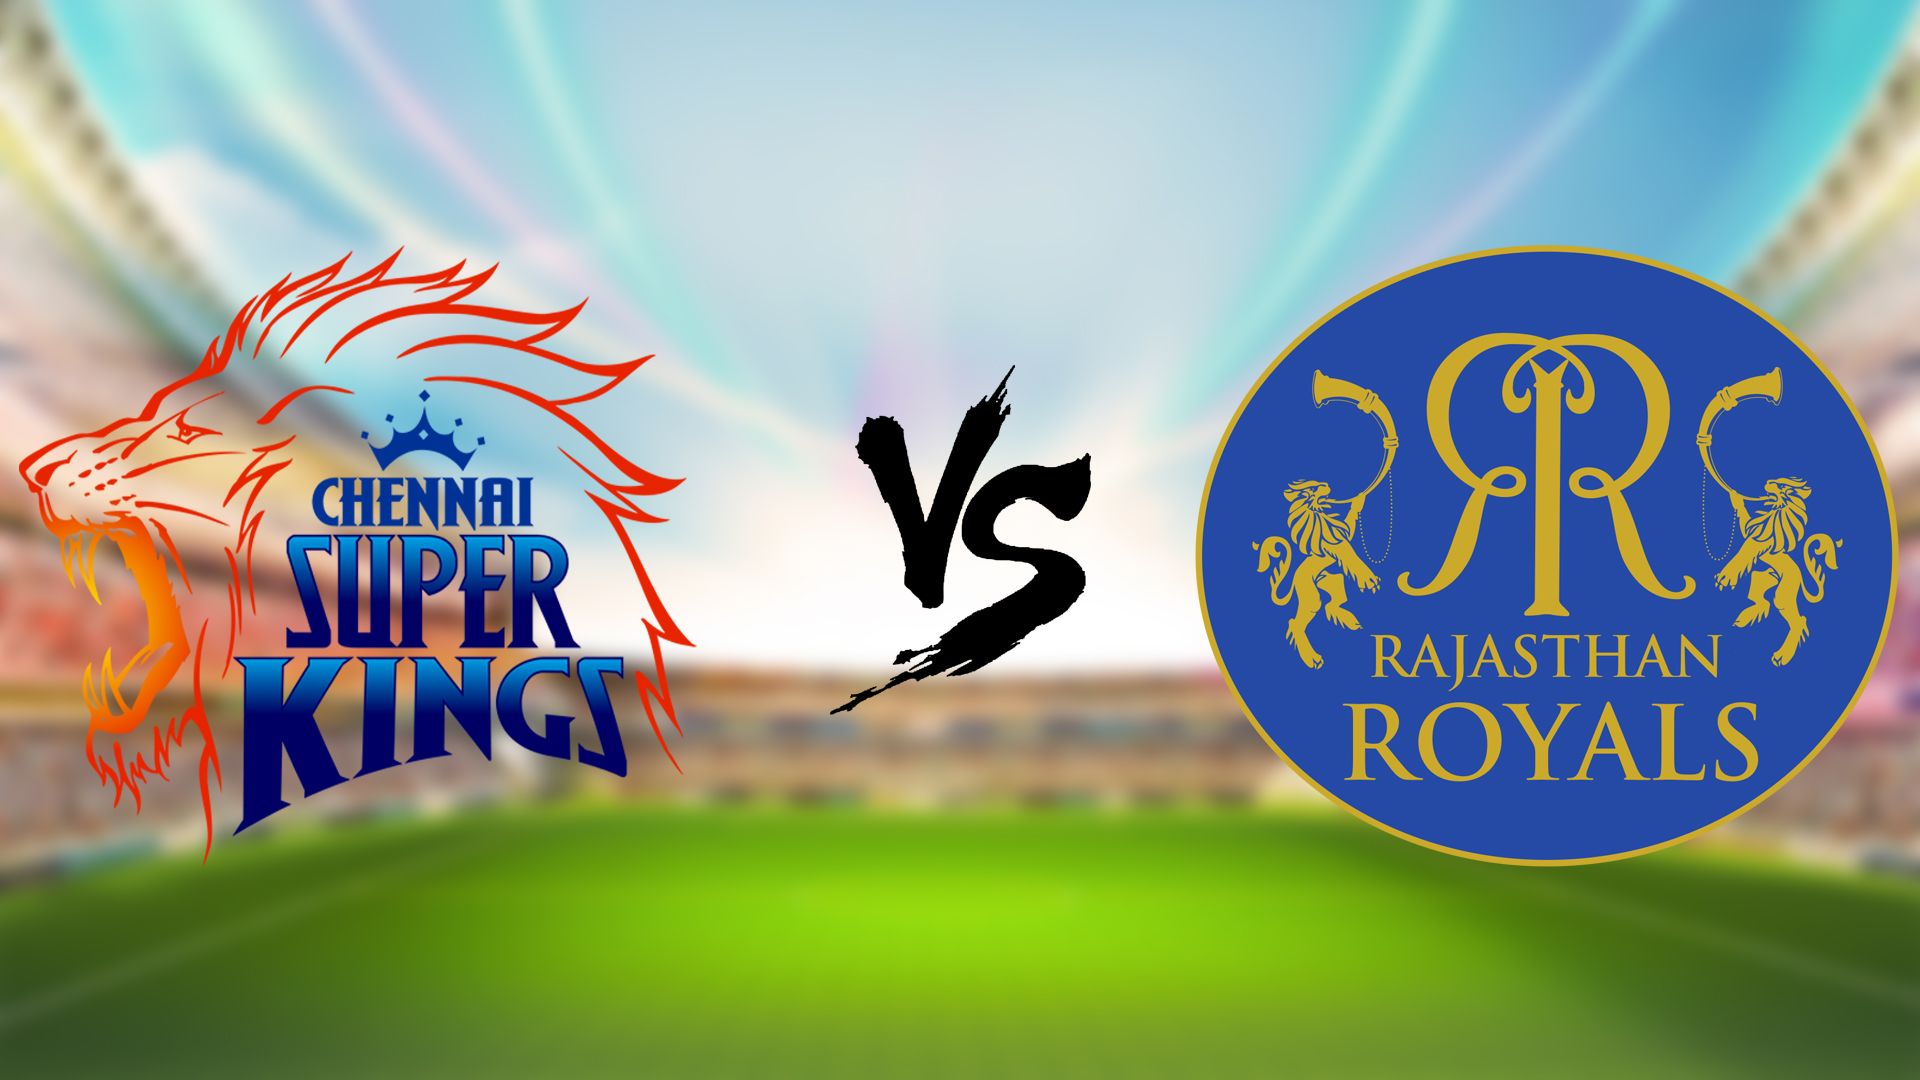 CSK vs RR: The two formerly banned teams will face-off after two years